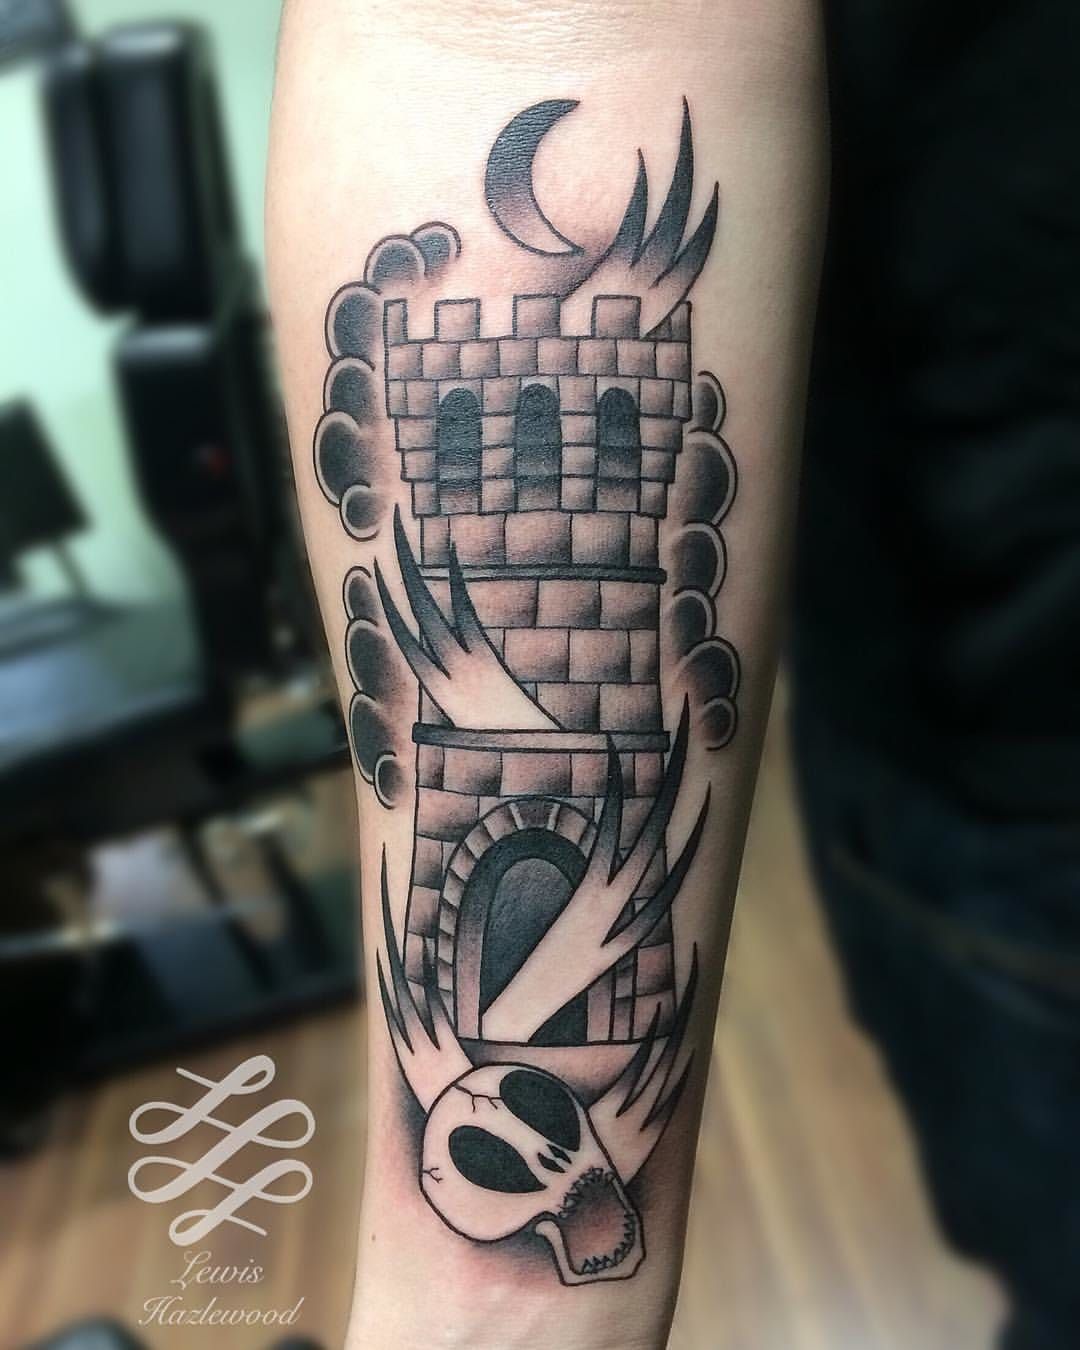 Burning house tattoo by tattooist yeahdope inked on the right ankle   Tattoos Home tattoo Cool forearm tattoos